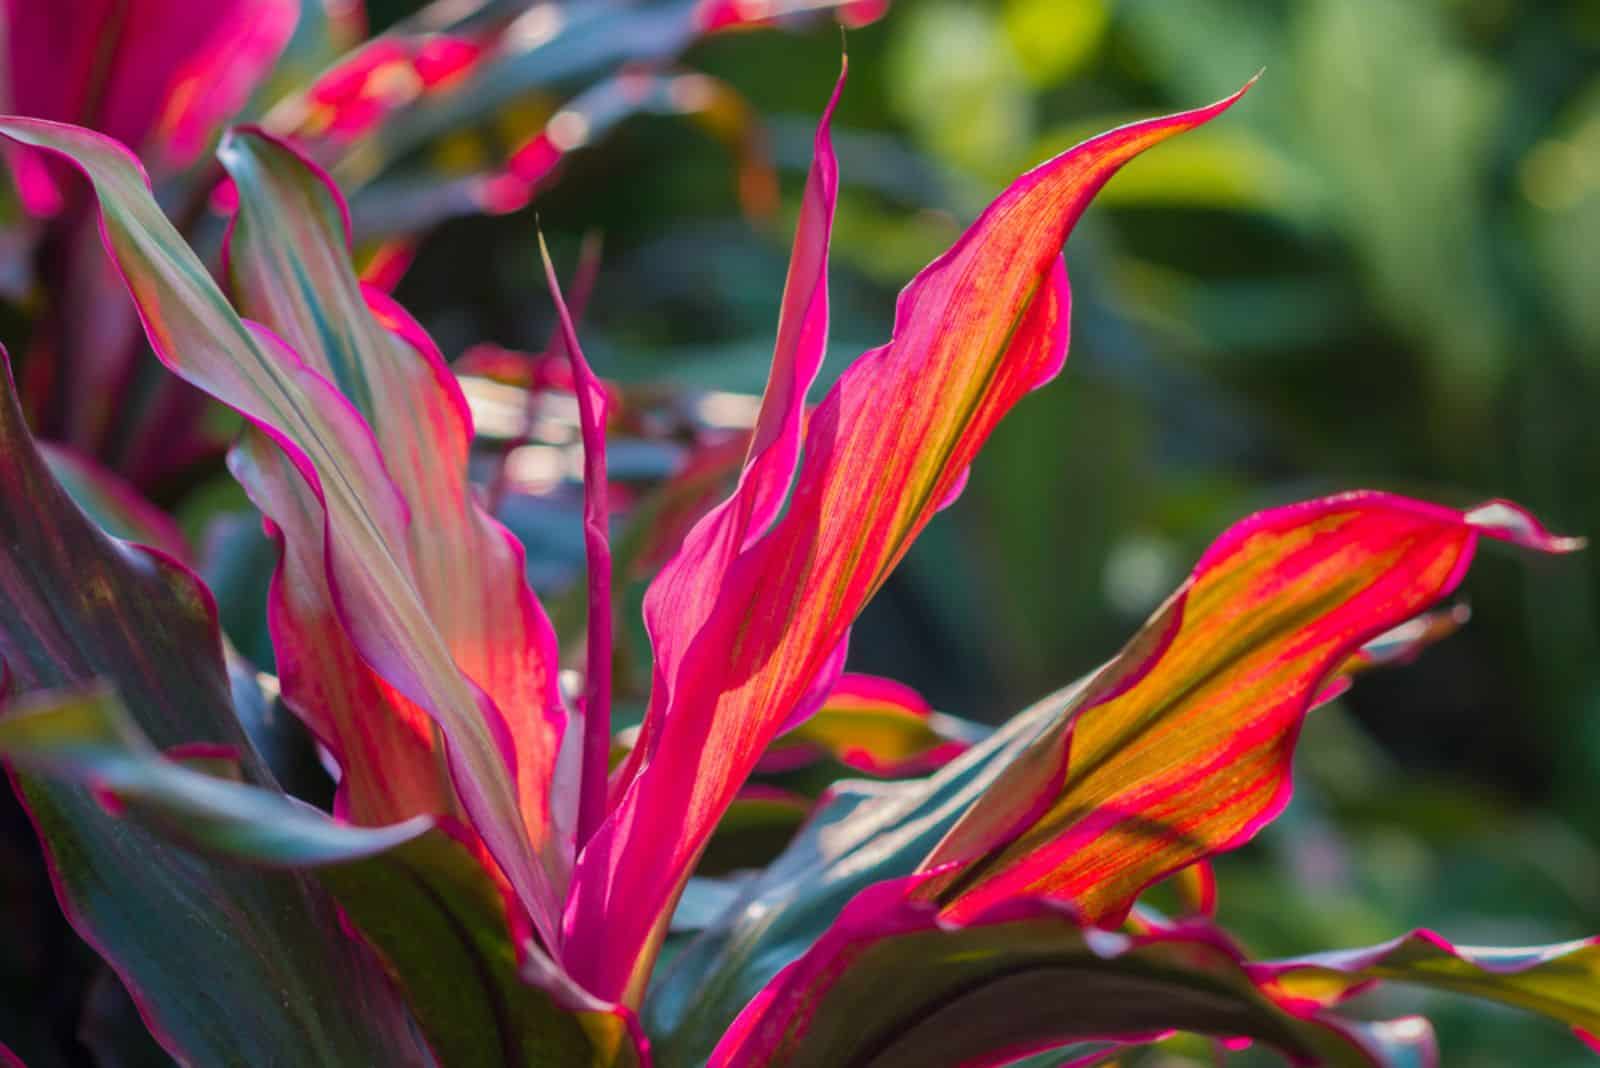 Long, bright, purple and pink leaves of a tropical plant in a garden